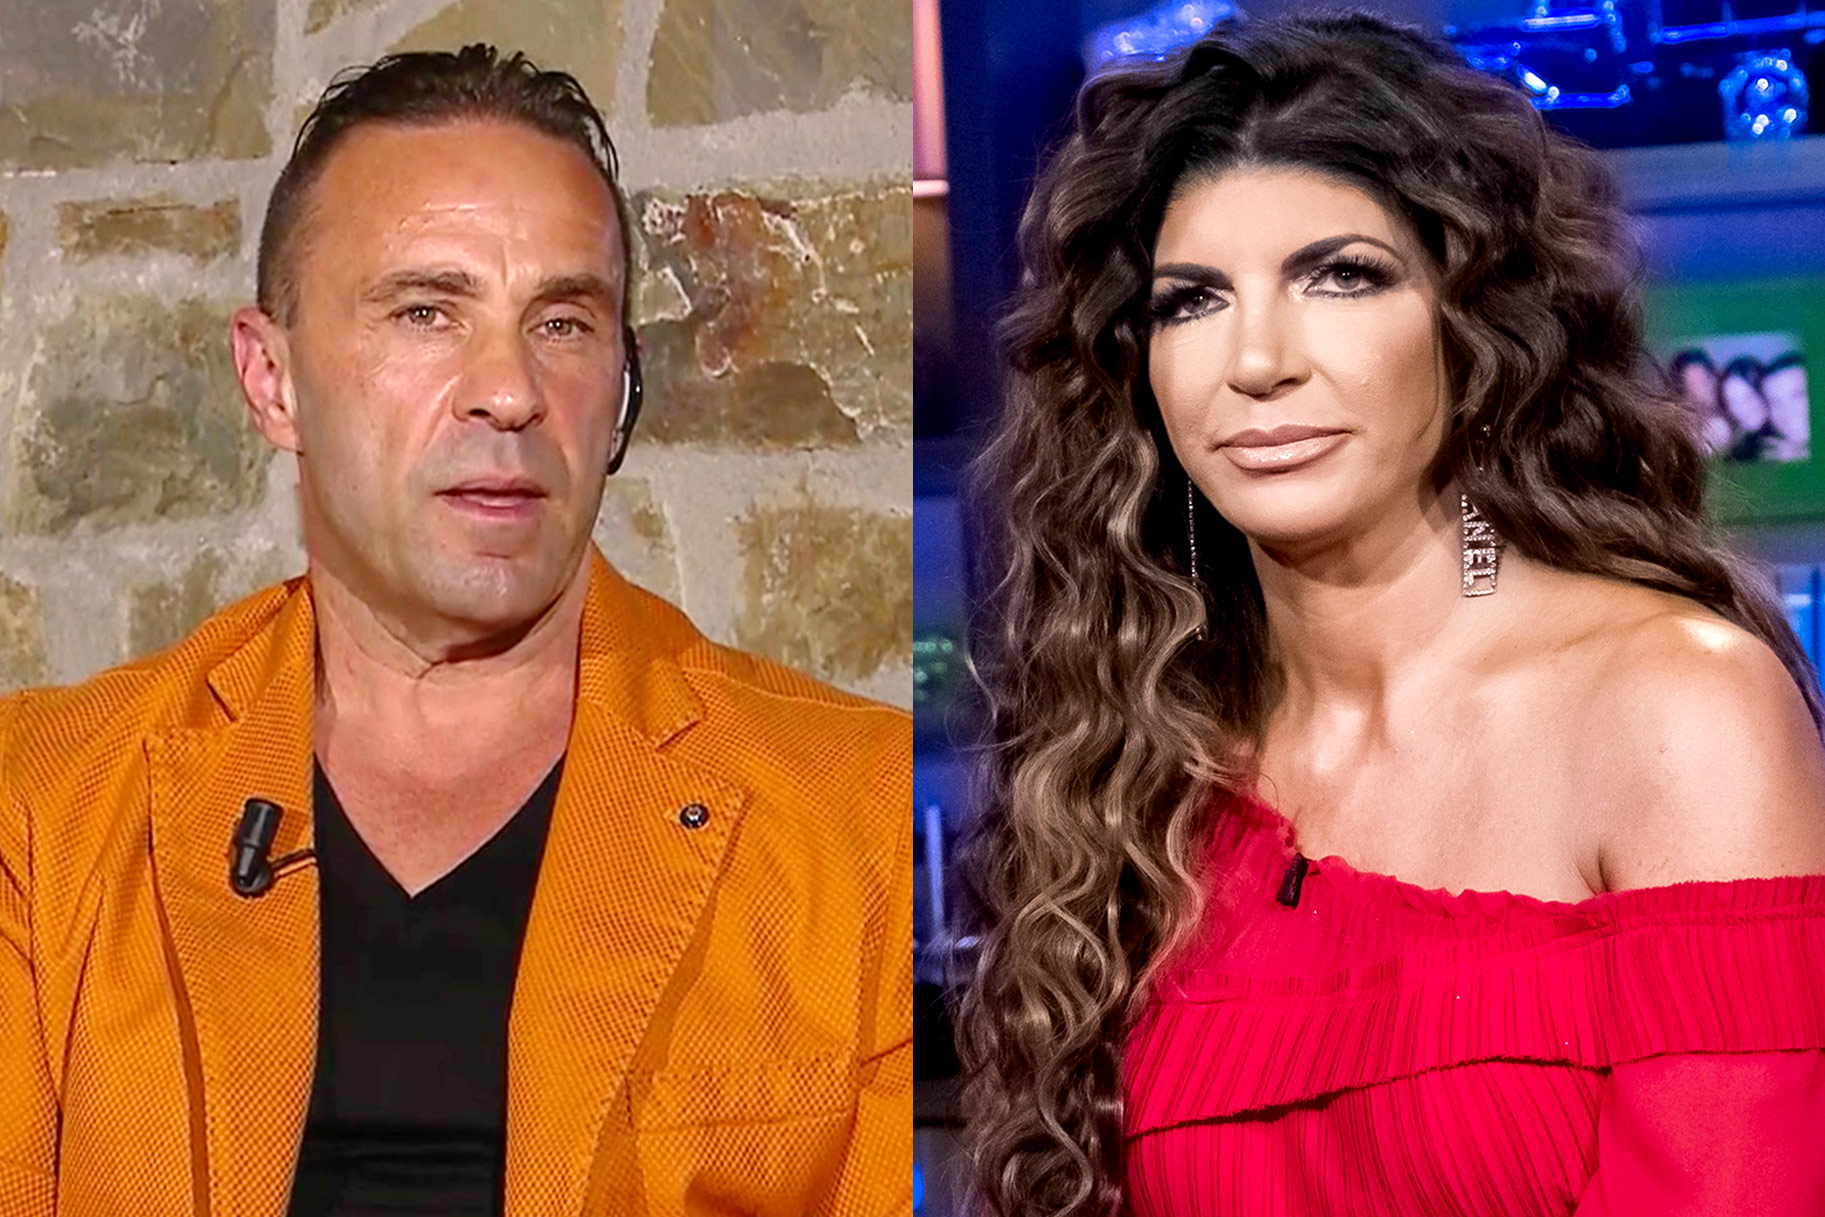 Joe Giudice Reacts to Tense Moment with Teresa on RHONJ When He Said "I Didn't Want to Get Married" - www.bravotv.com - New Jersey